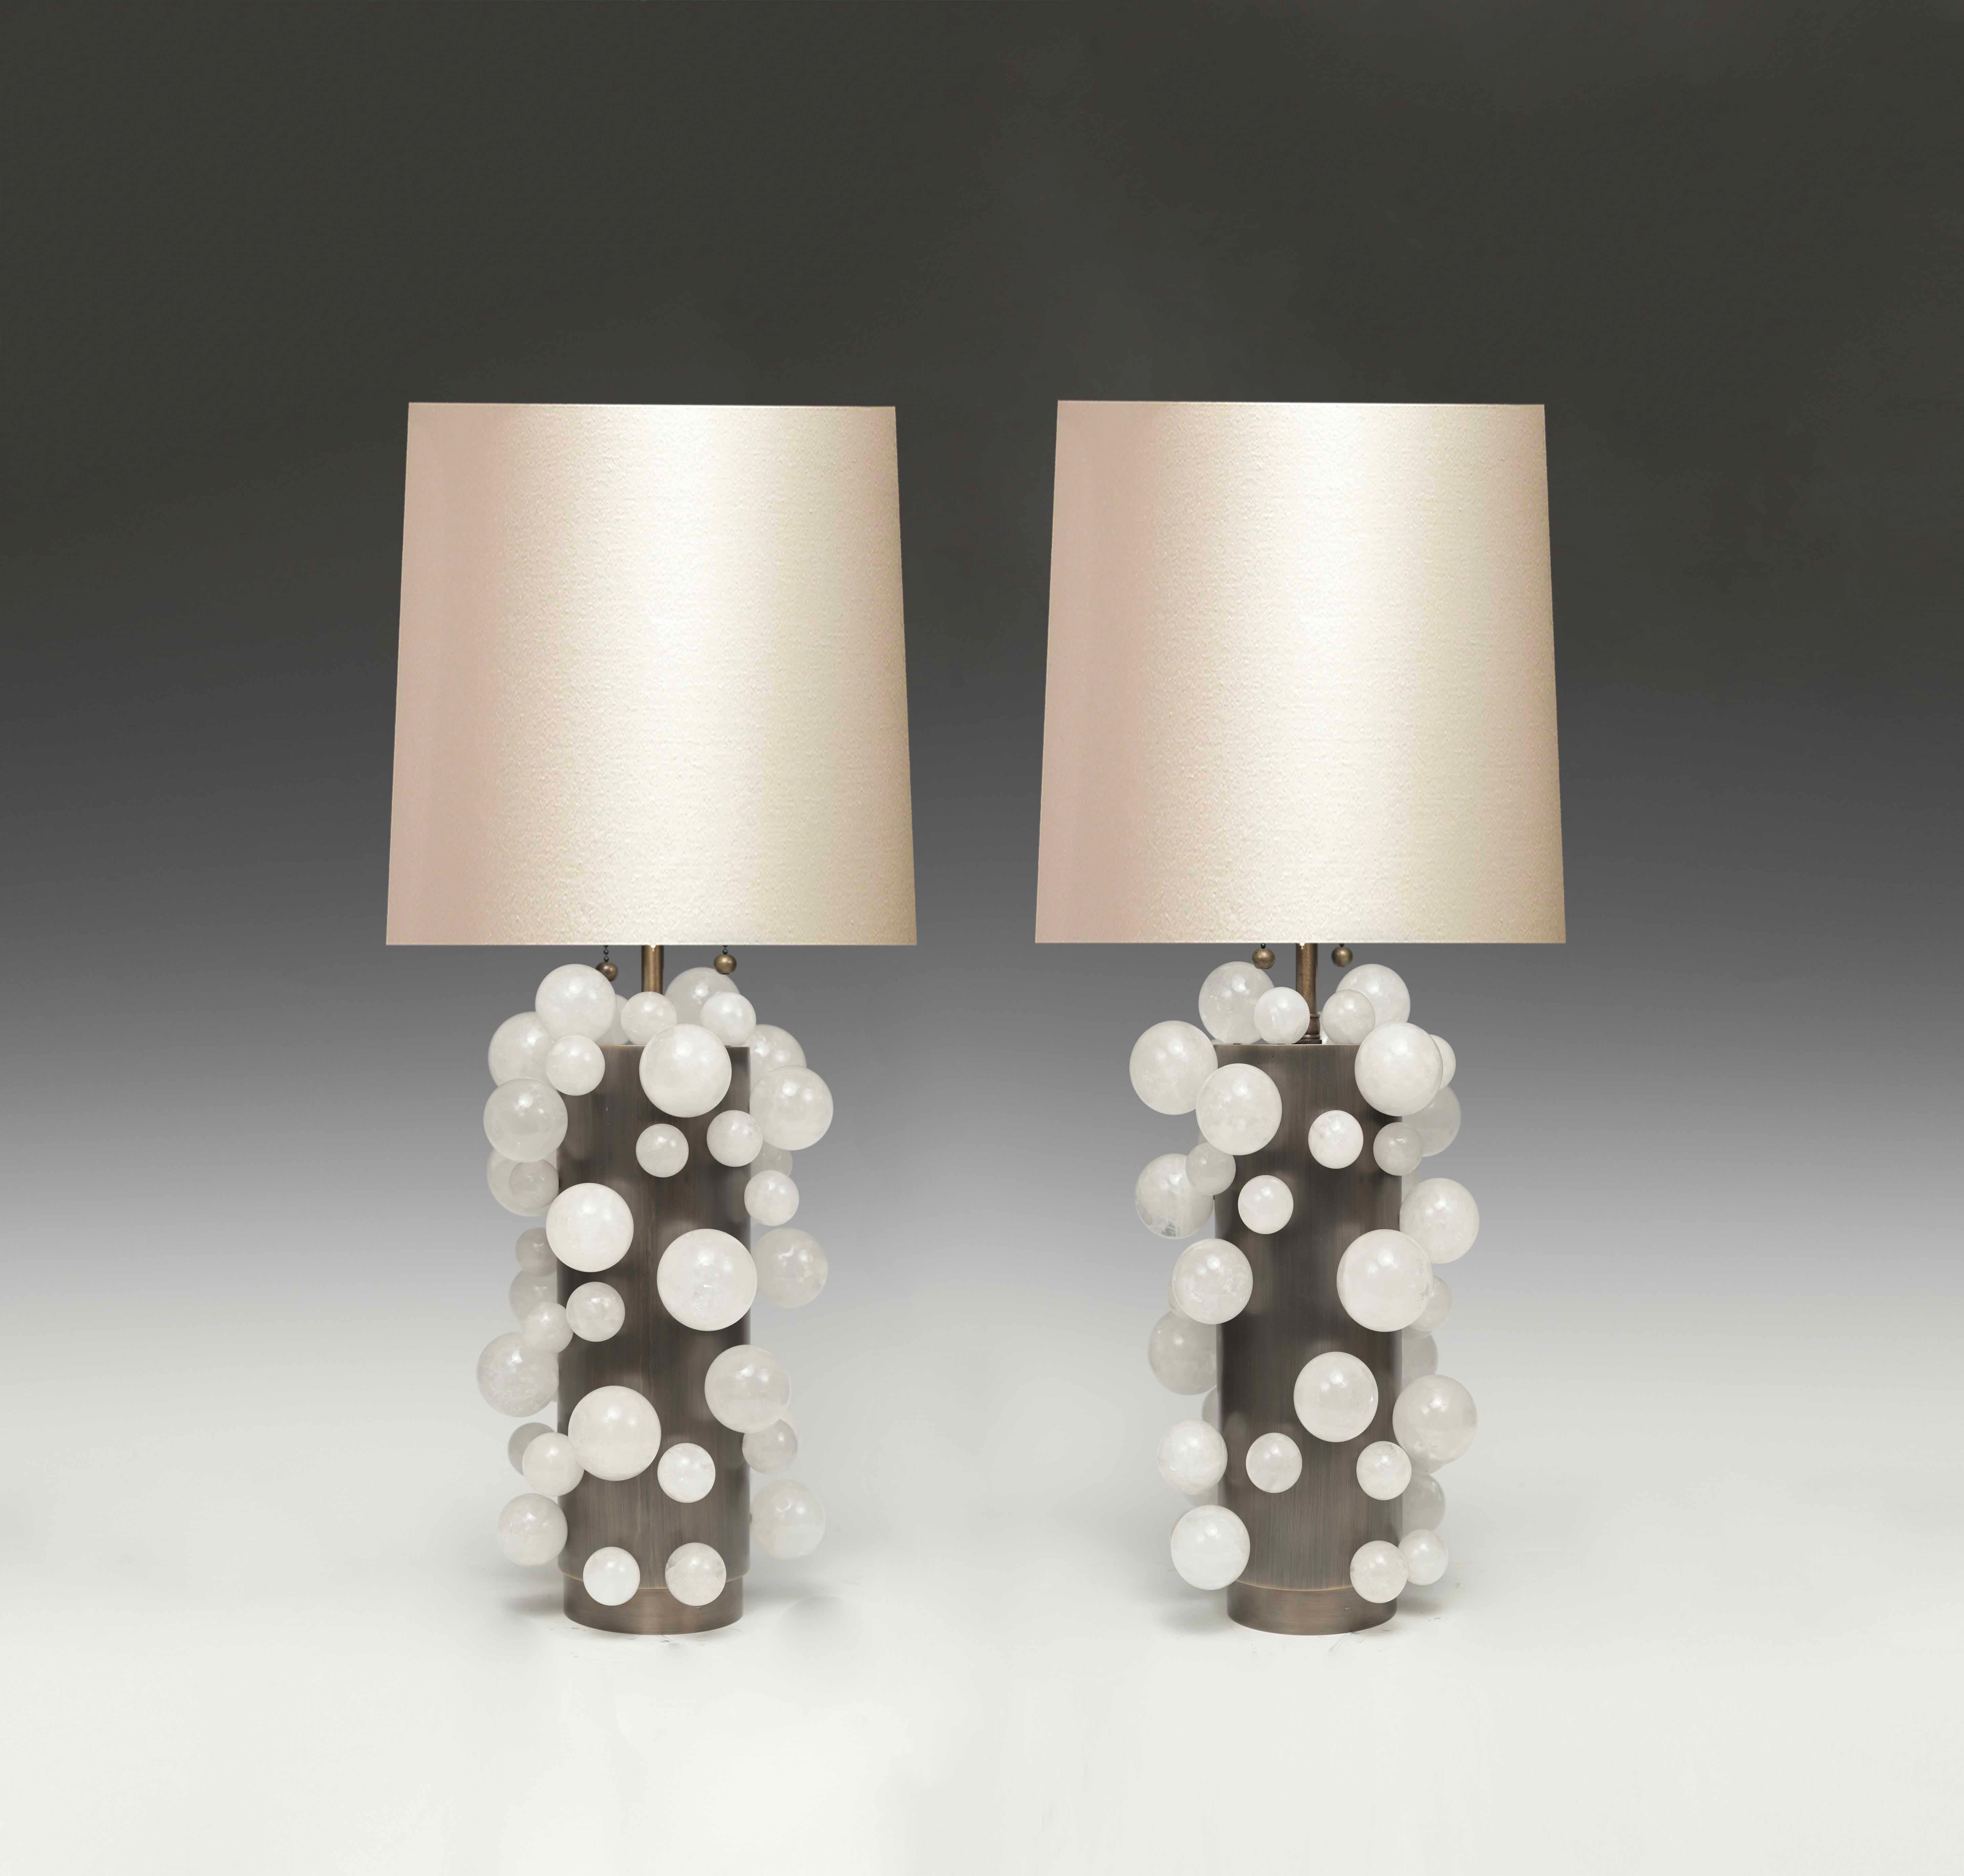 A pair of luxury white rock crystal quartz bulb lamps with antique brass bases, created by Phoenix Gallery, NYC.
Each lamp installed two sockets.

Lampshade not included.